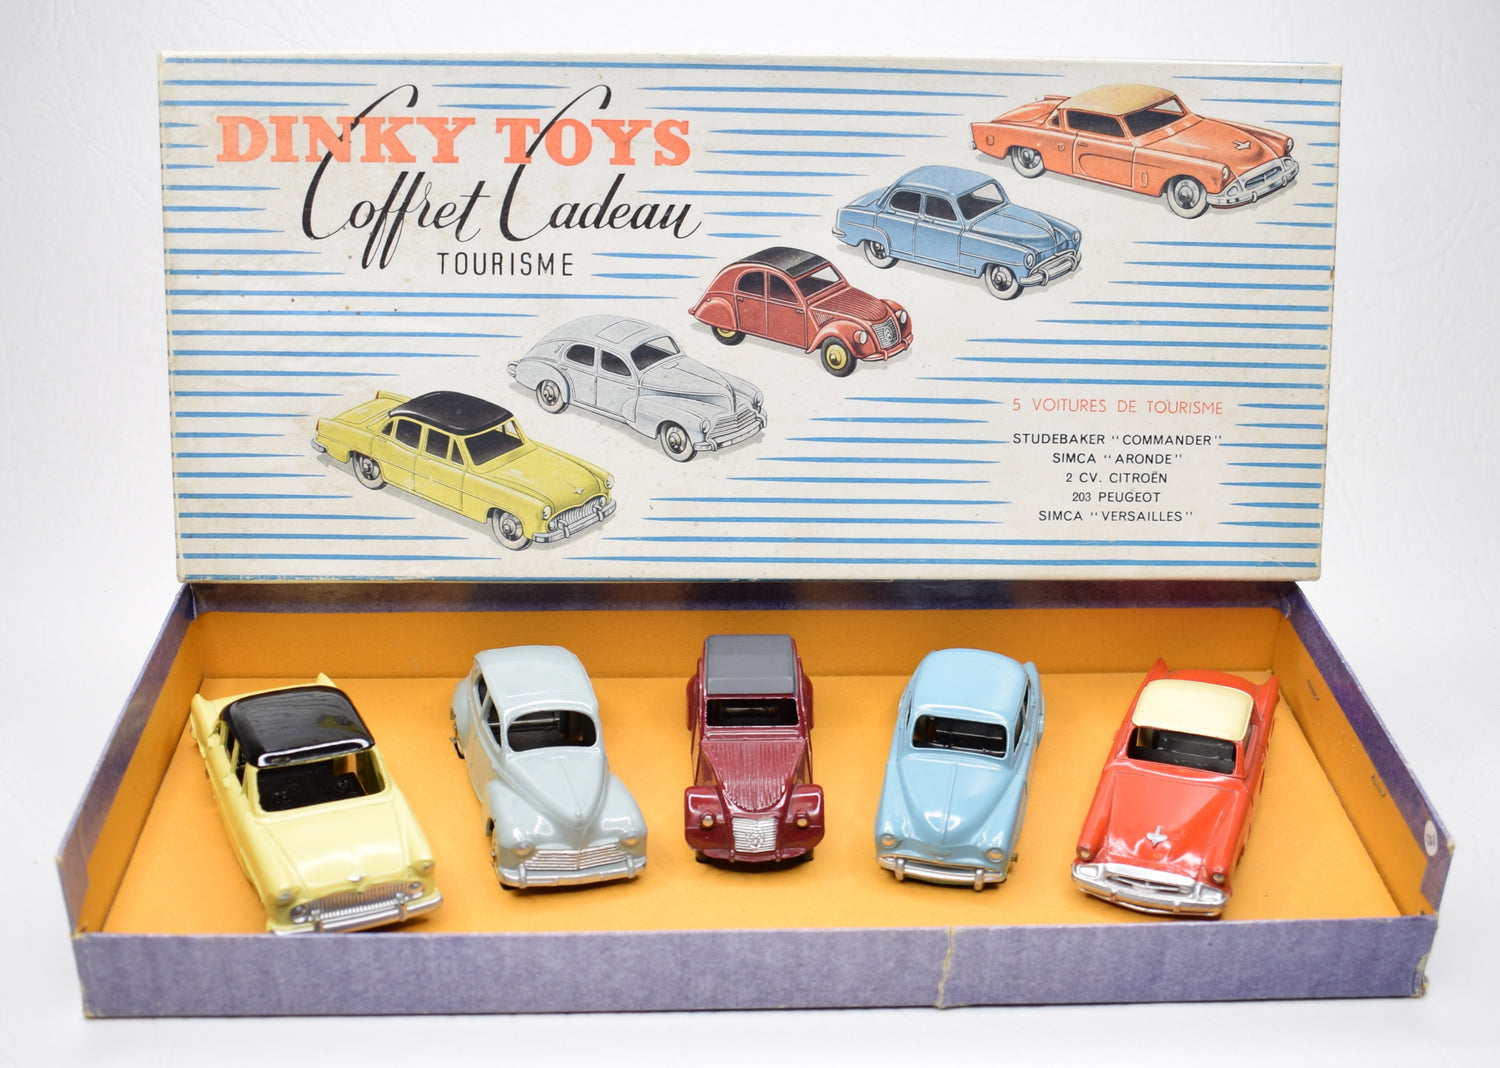 French Dinky toys 24-56 Touring Car Gift Set Virtually Mint/Boxed